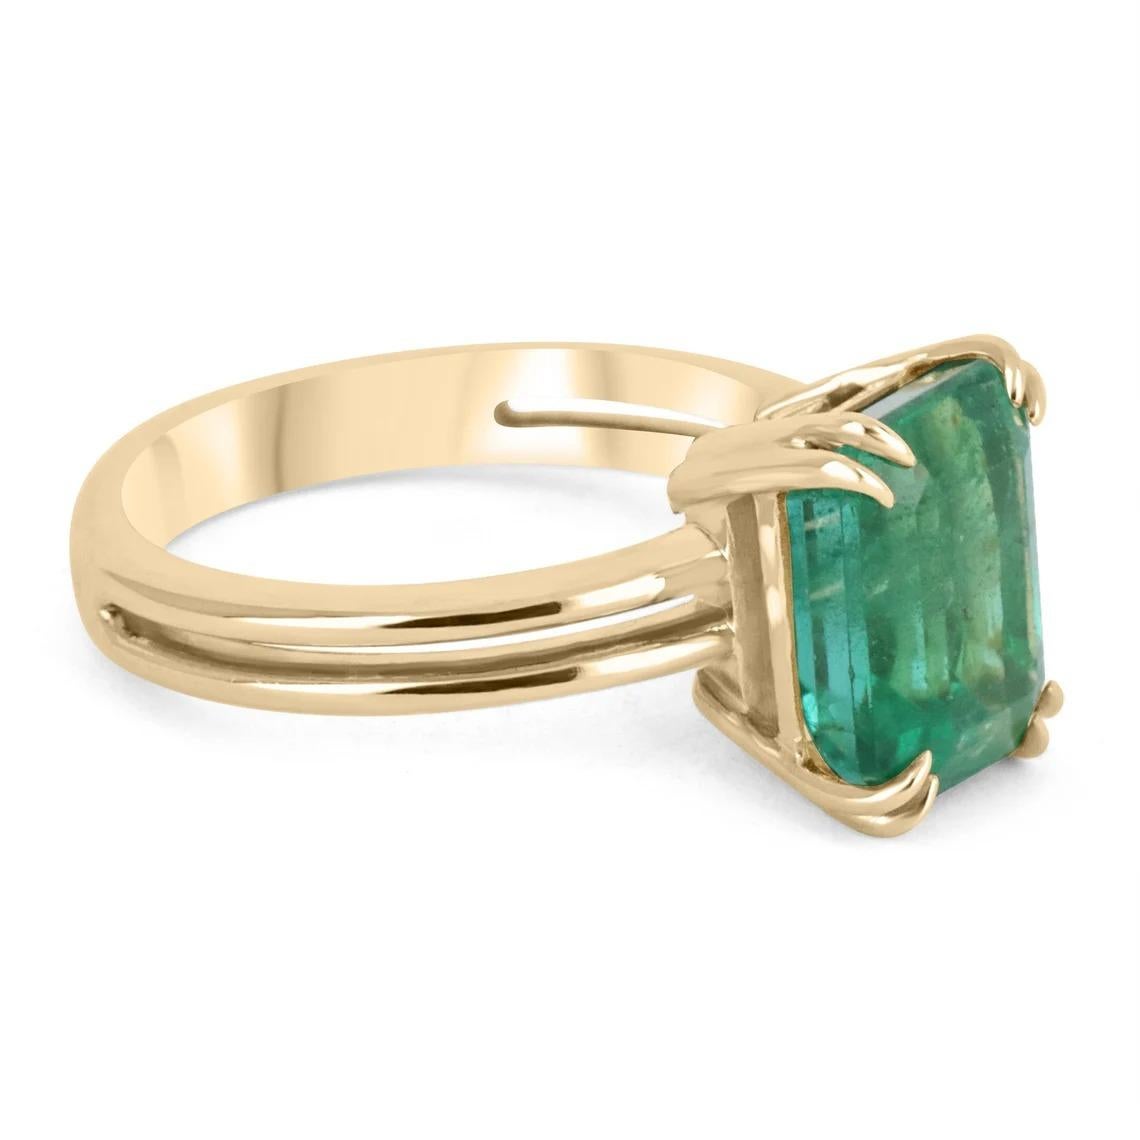 Behold this stunning 4.89-carat Zambian emerald solitaire ring. The large, natural emerald weighs a full 4.89-carats. The gem showcases a gorgeous dark green color and almost great eye clarity with minor flaws; as these are natural earth-mined gems.